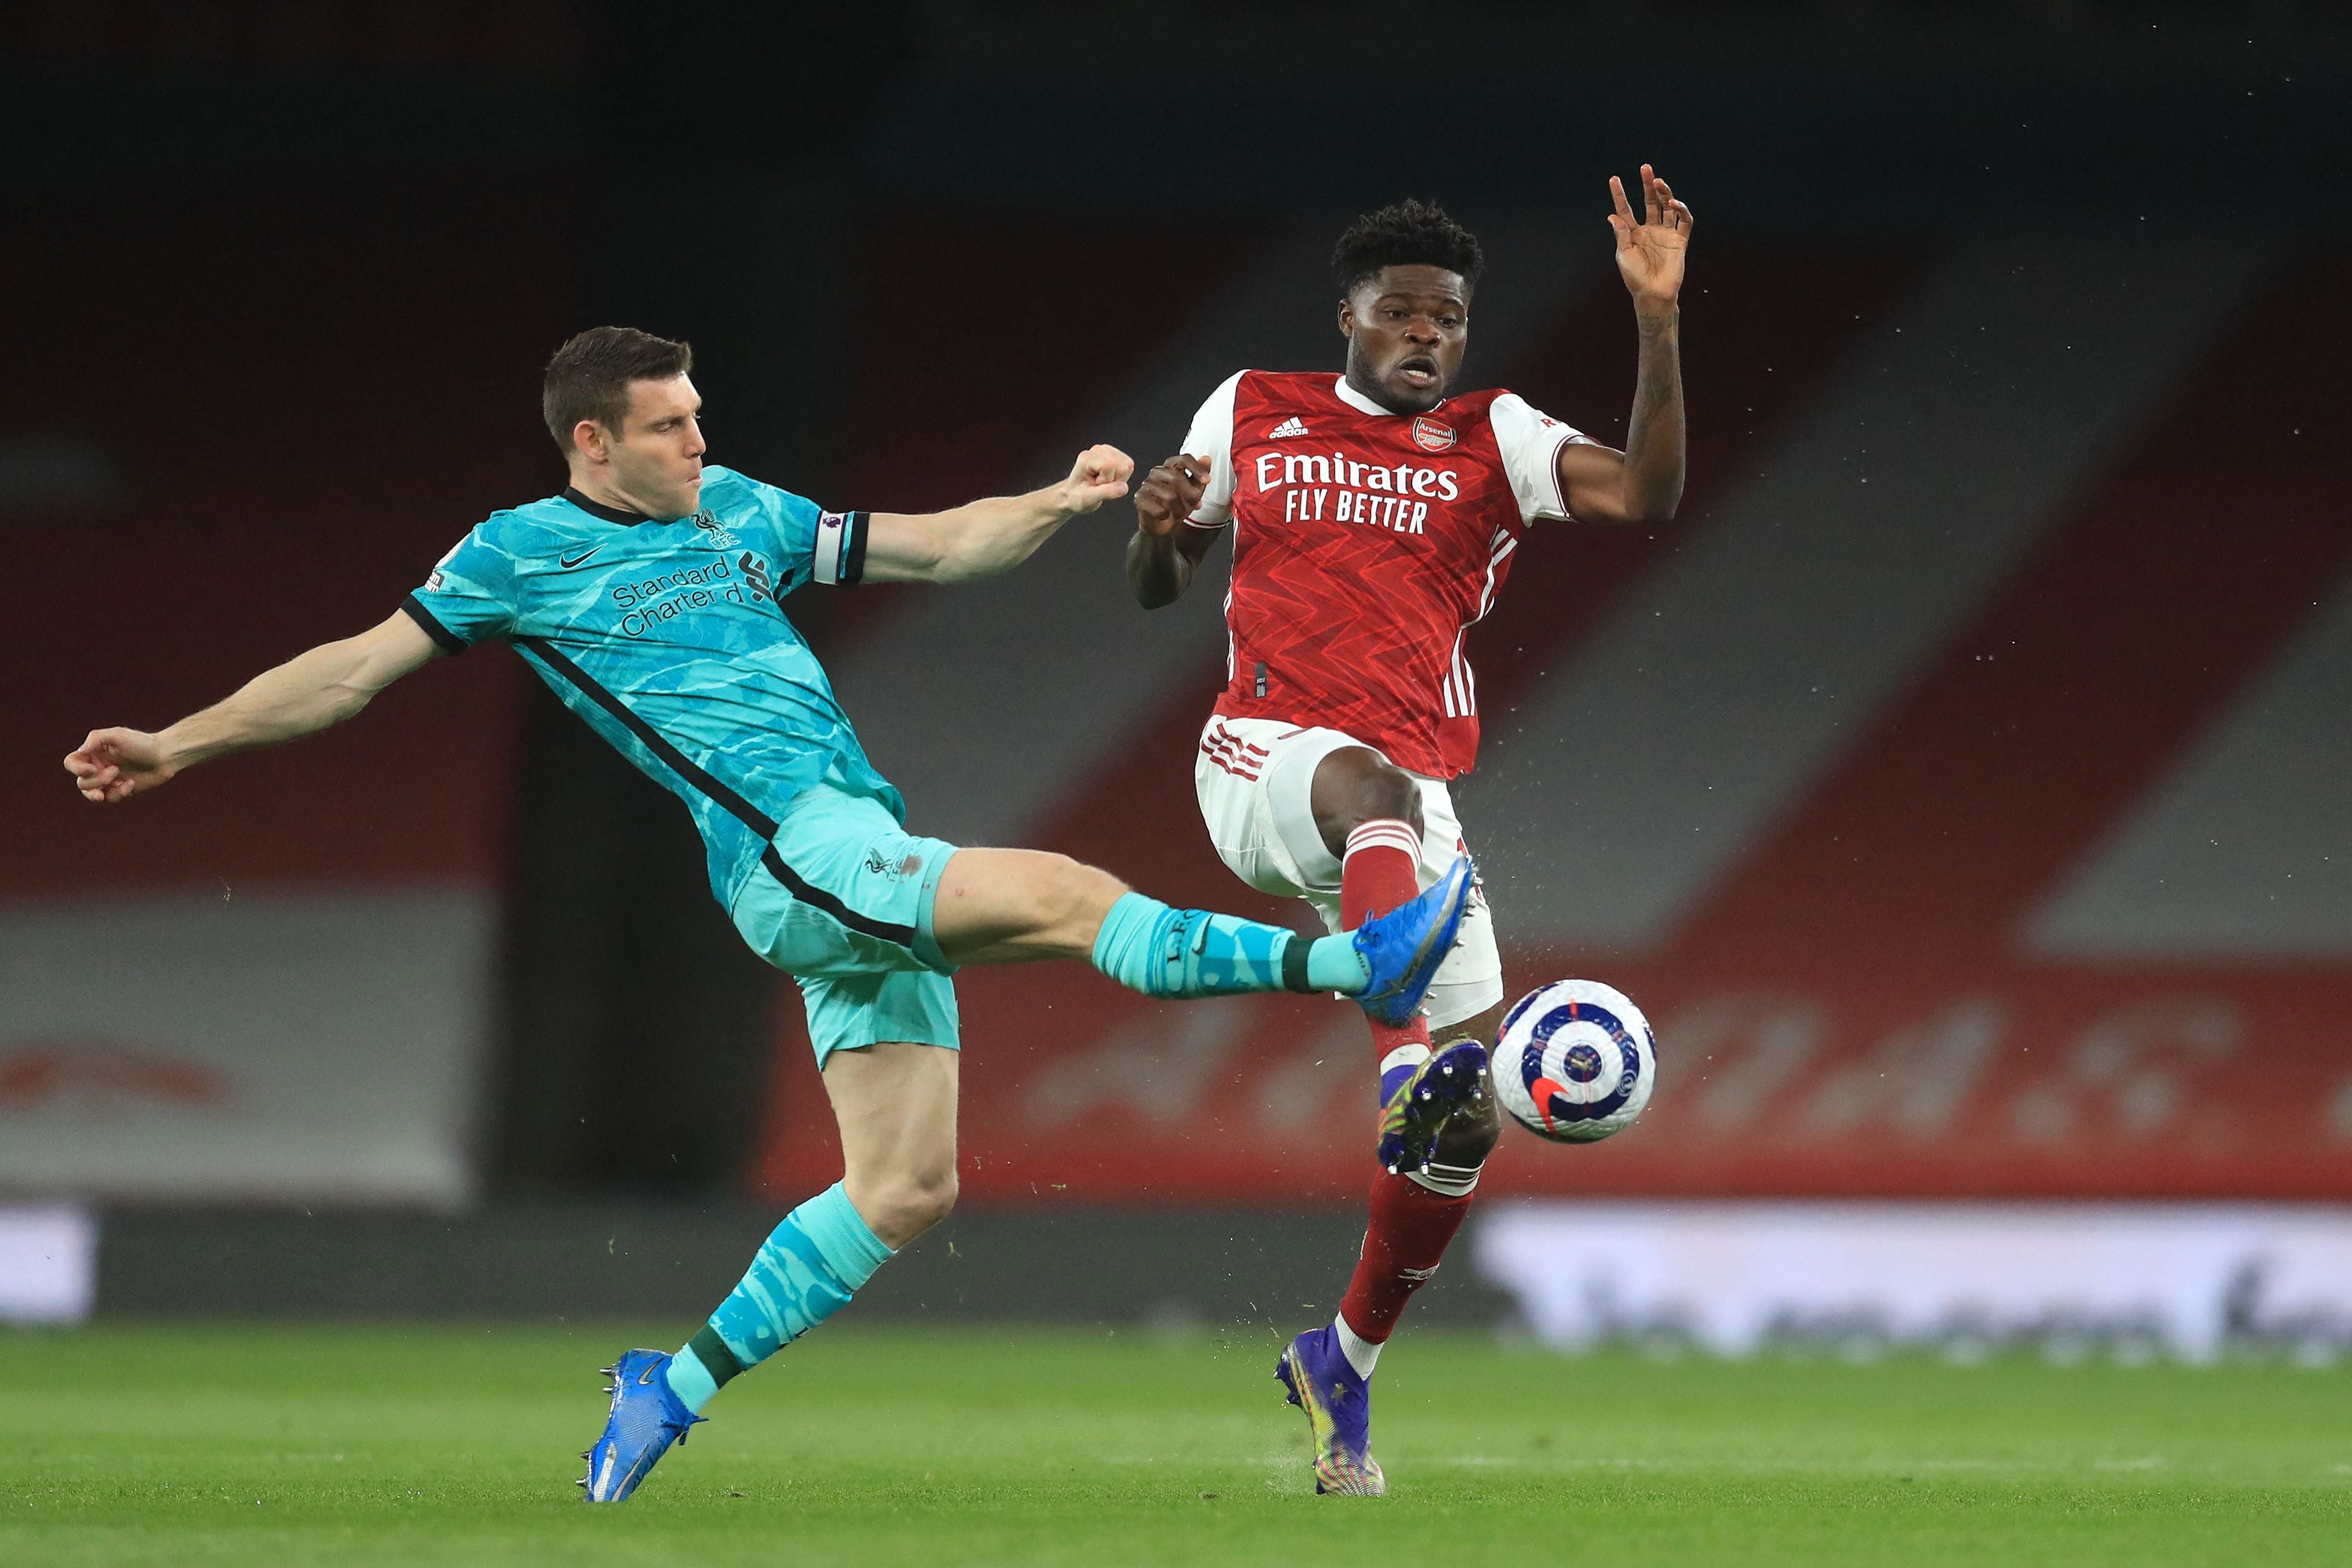 James Milner battles with Thomas Partey for the ball